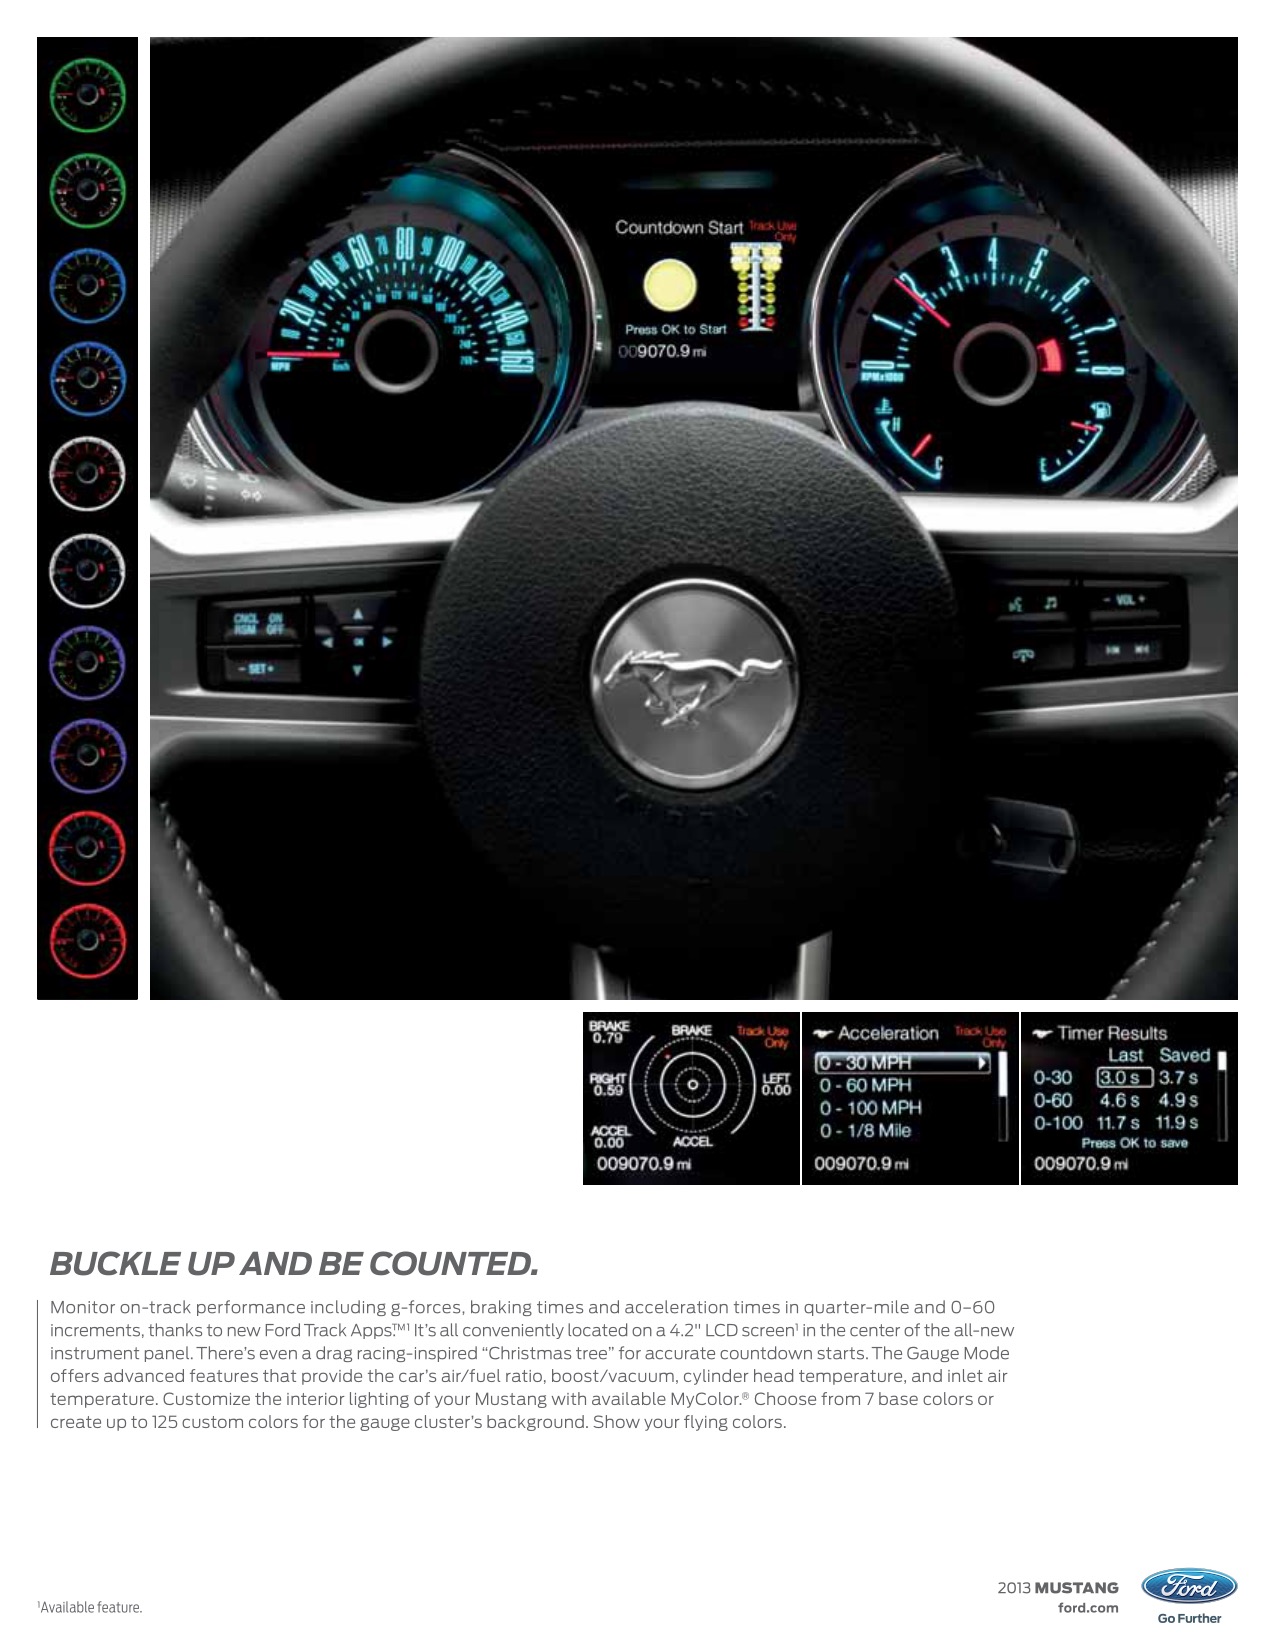 2013 Ford Mustang Brochure Page 7